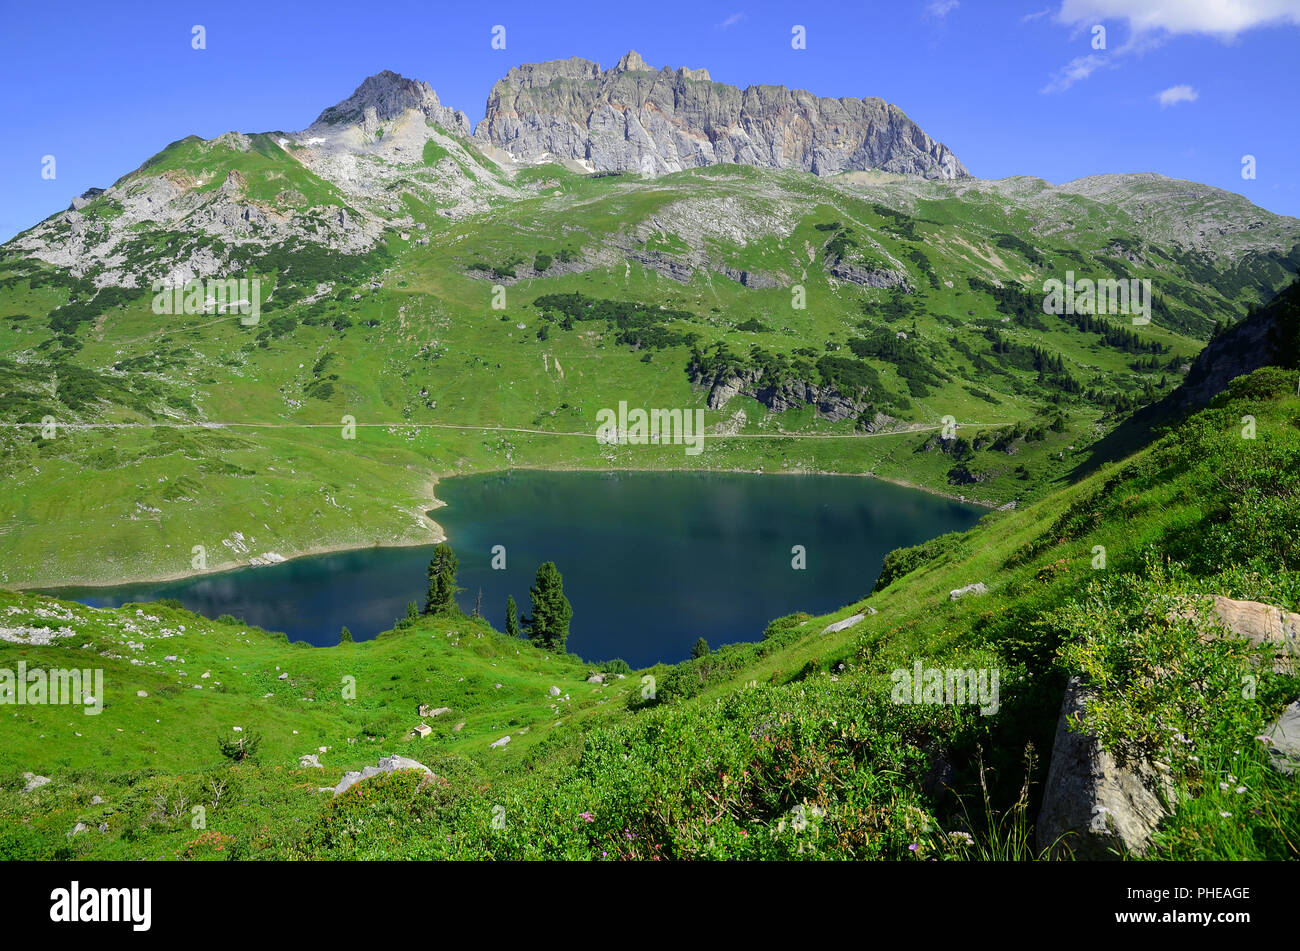 alps; Austria; Rote Wand; Formarinsee; Stock Photo